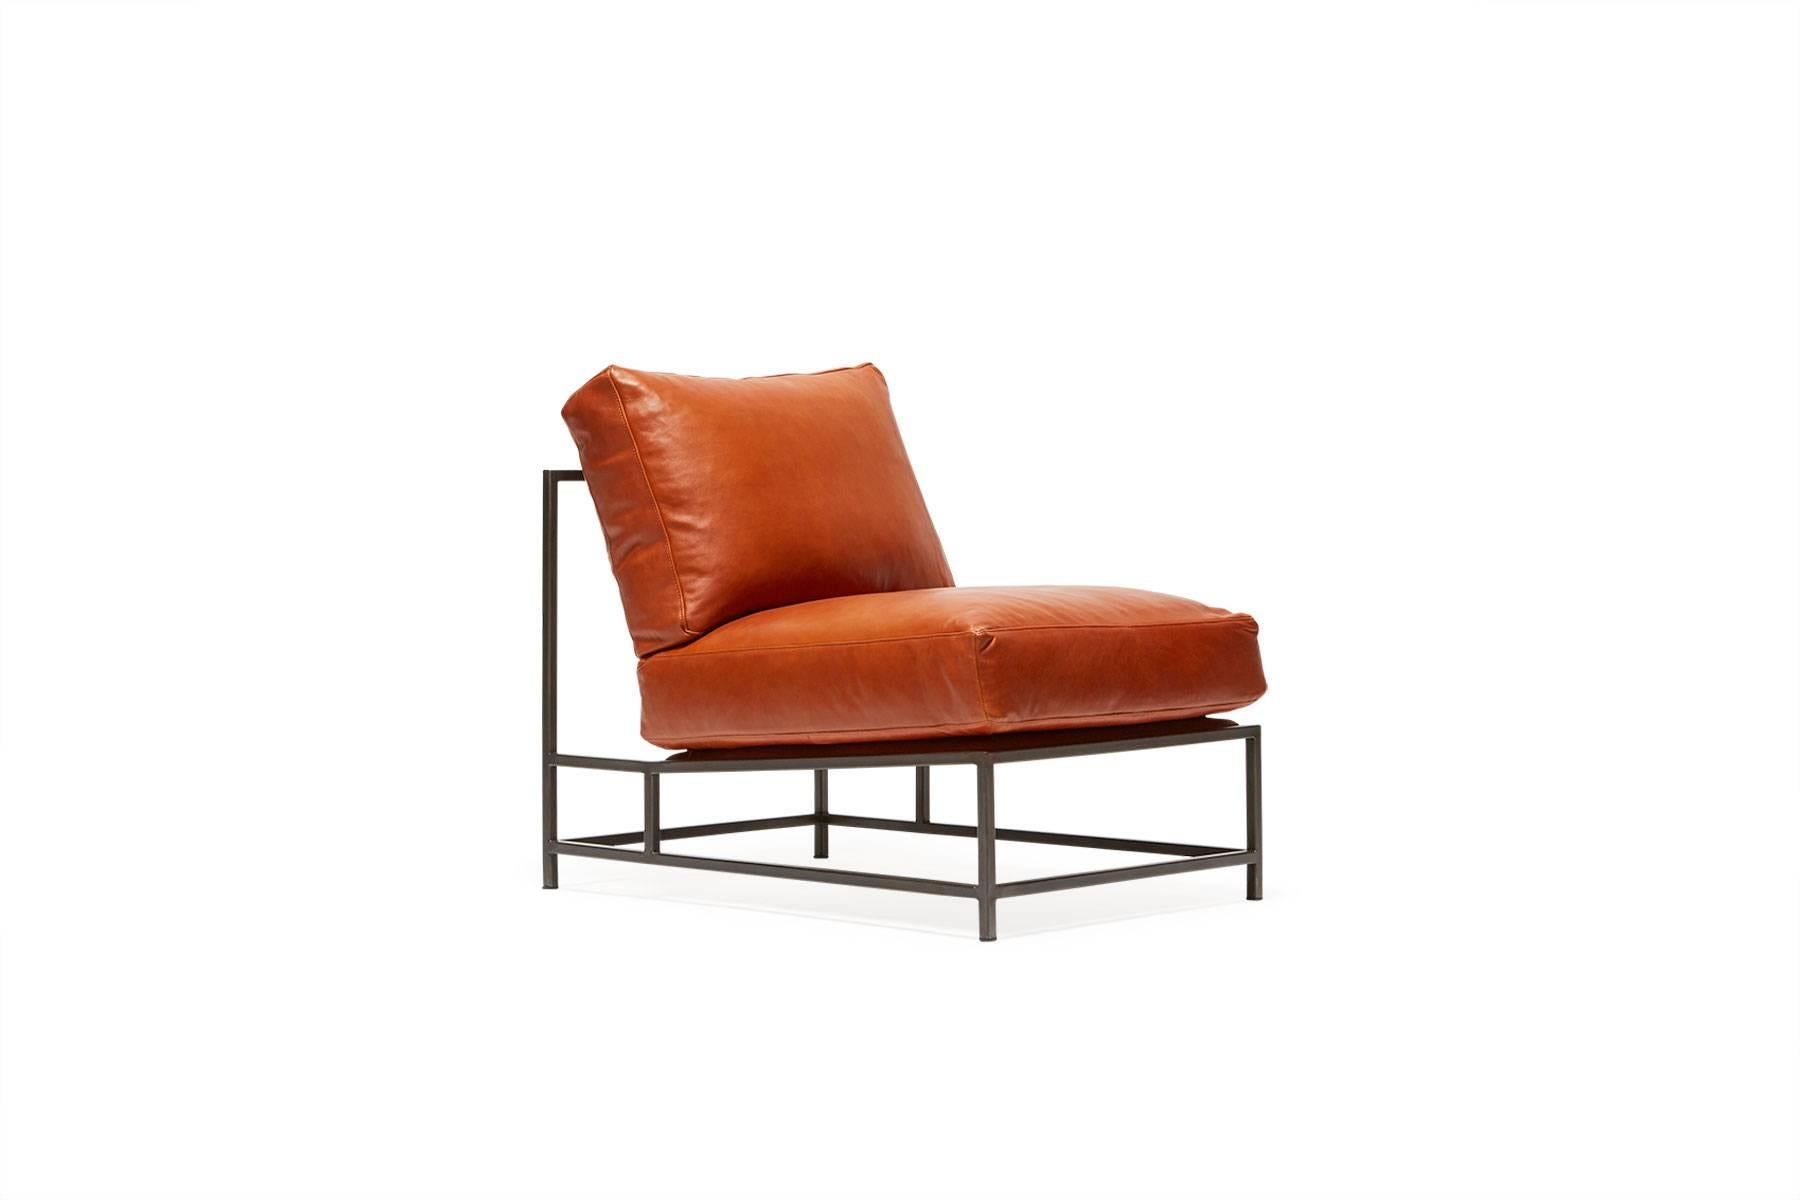 Sleek and refined, the Inheritance Chair is a great addition to nearly any space.  

This variation is upholstered in the same soft, cognac leather as our Encounter Collection bags. The foam seat cushions have been wrapped in down, allowing for a